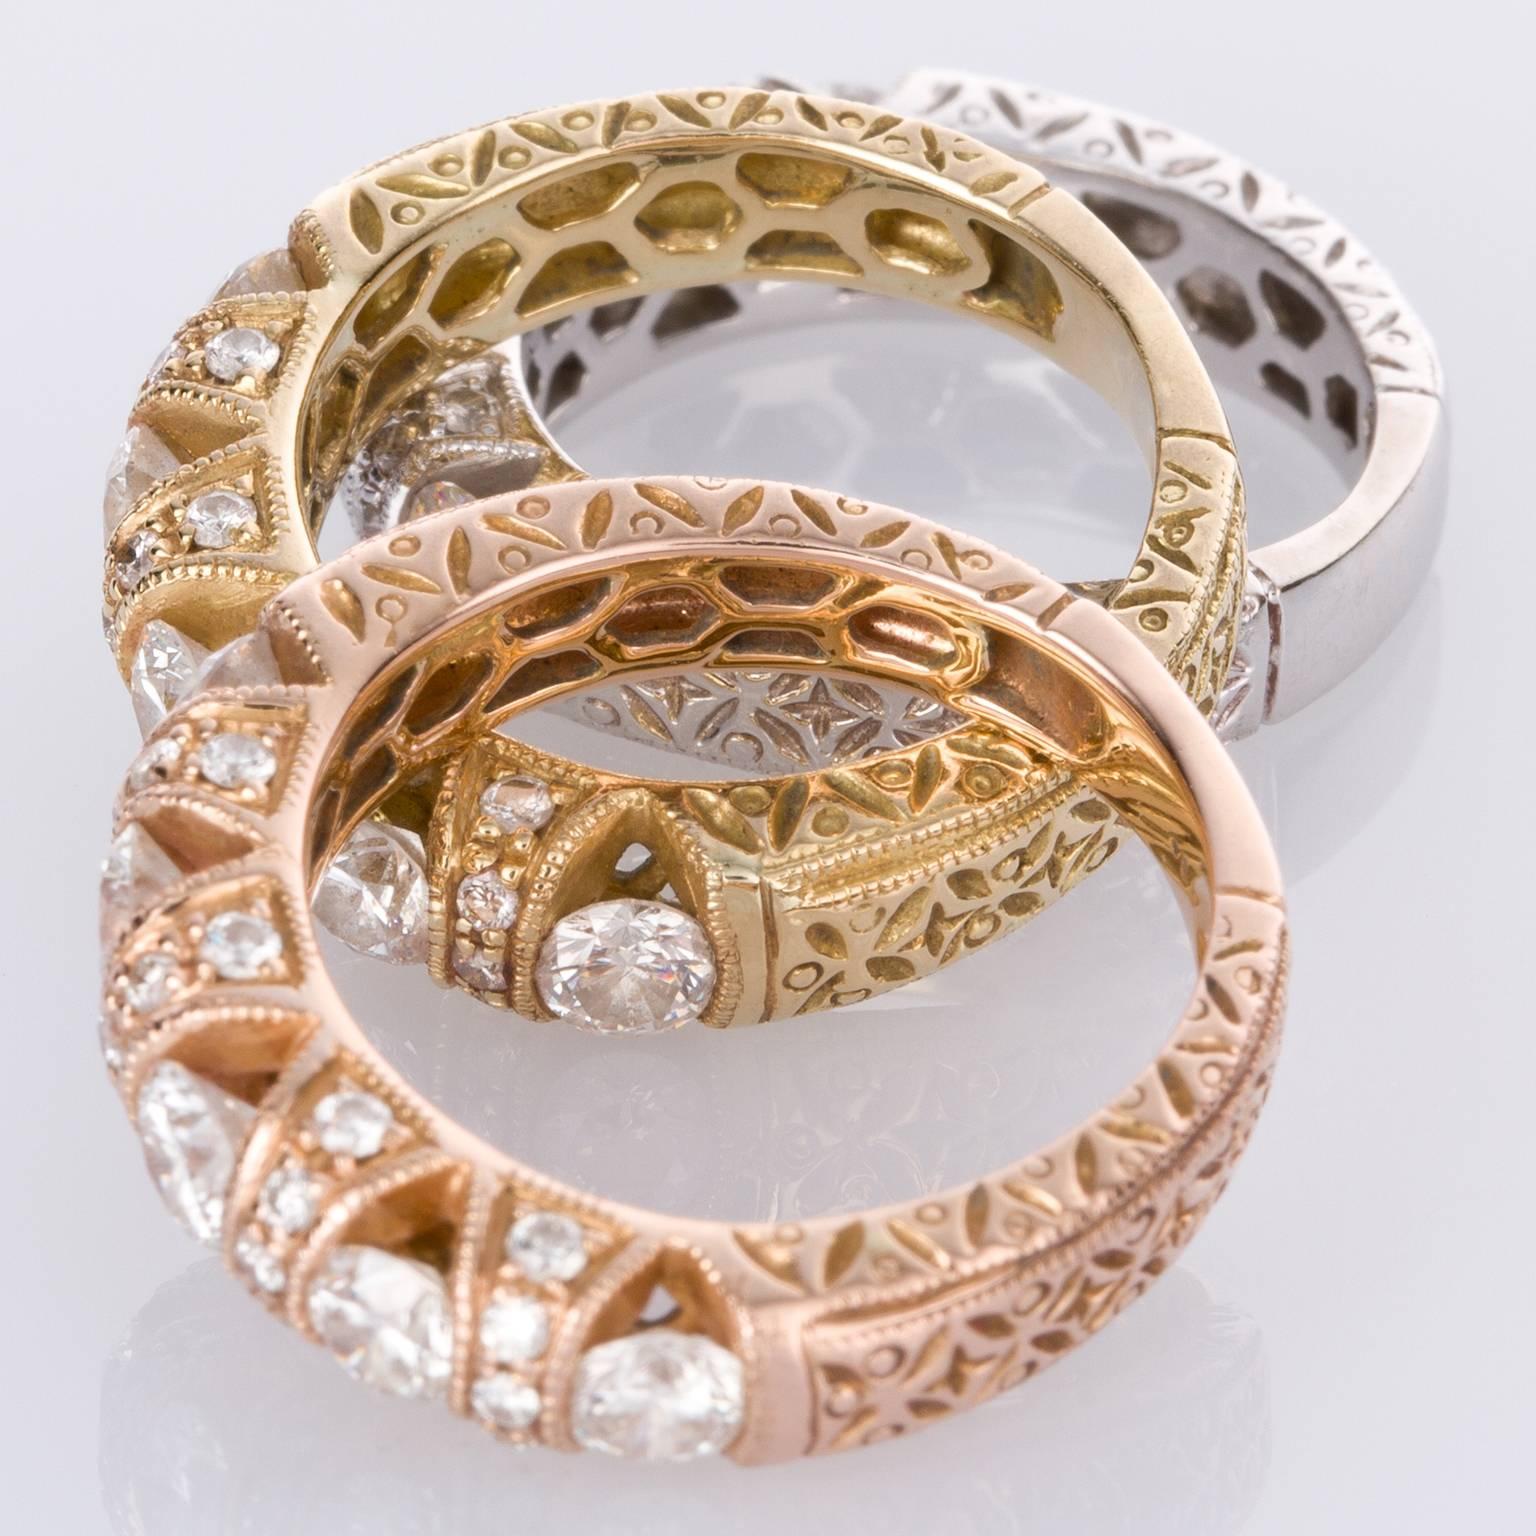 Looks great as a set of rings, but also individually these rings make a statement. A beautifully crafted 18k rose gold eternity band with fine detailing including engraving down the shank, as well as diamonds set into the sides of the bands.